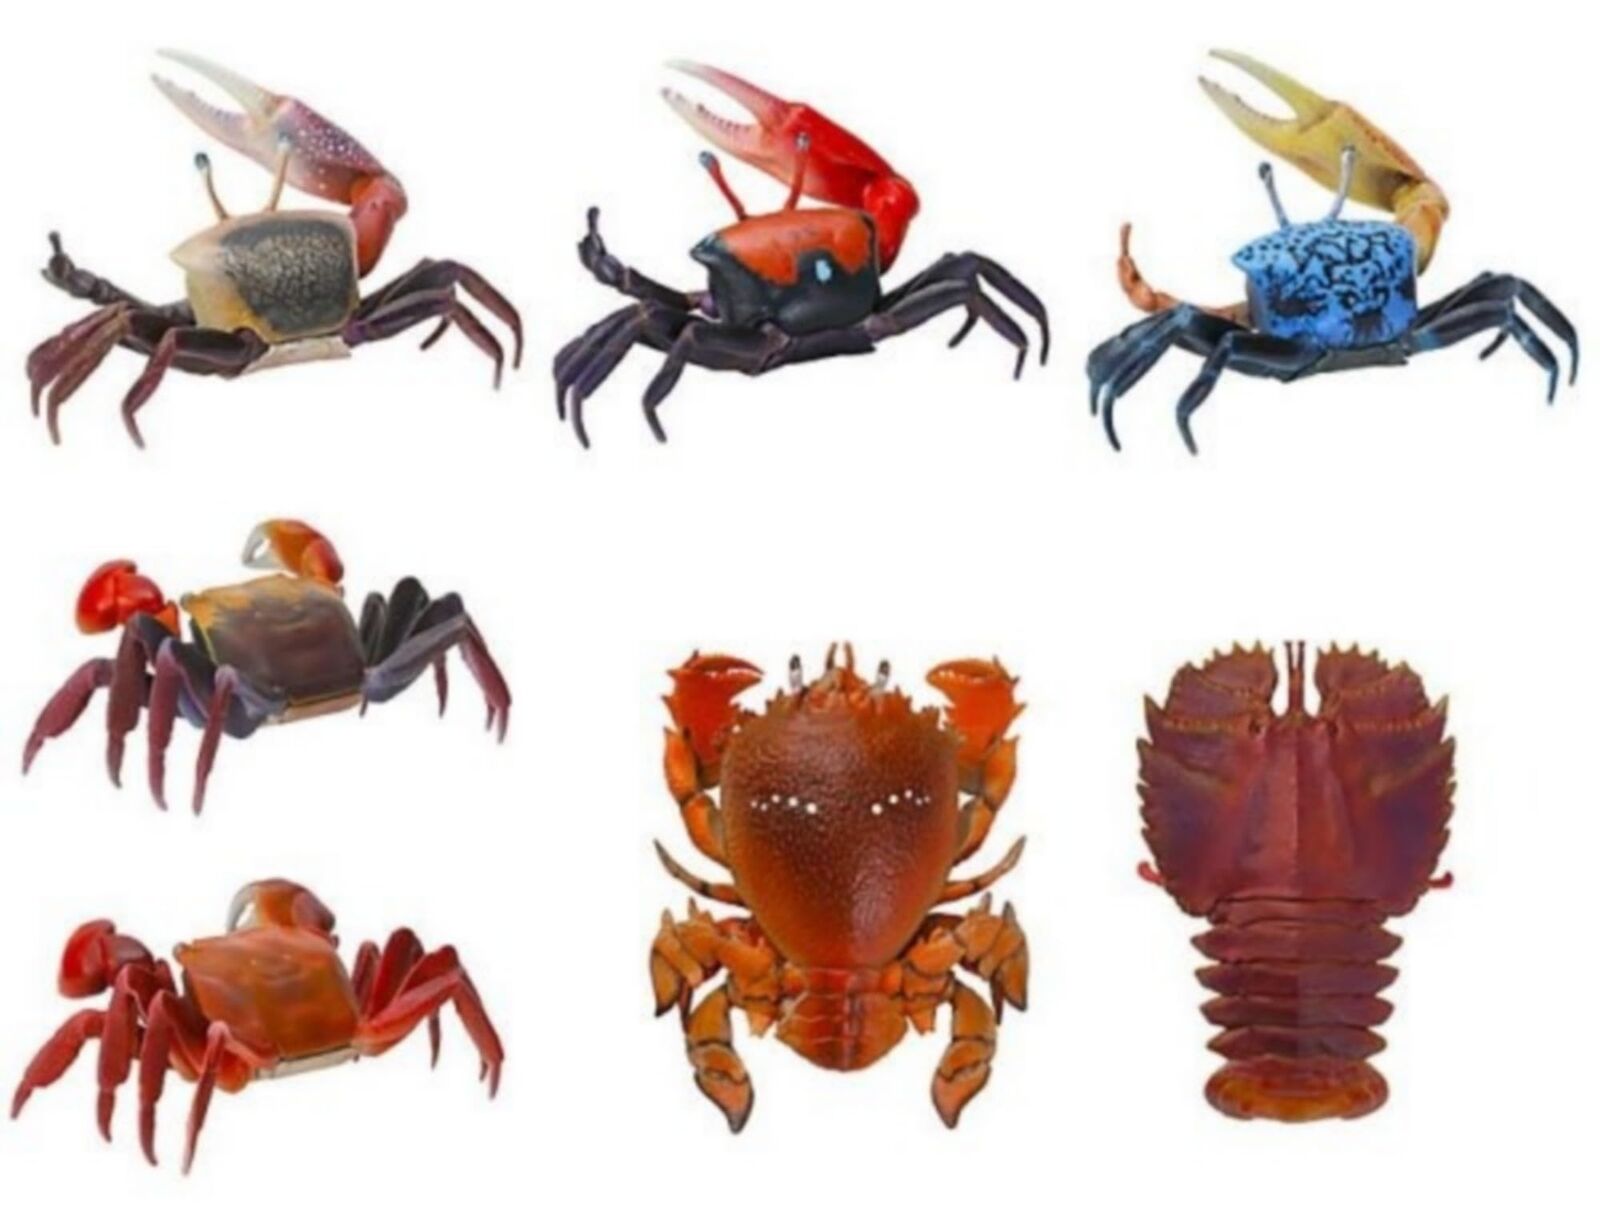 Illustrated encyclopedia of creatures mini collection Crustacea 01 x all 7 types